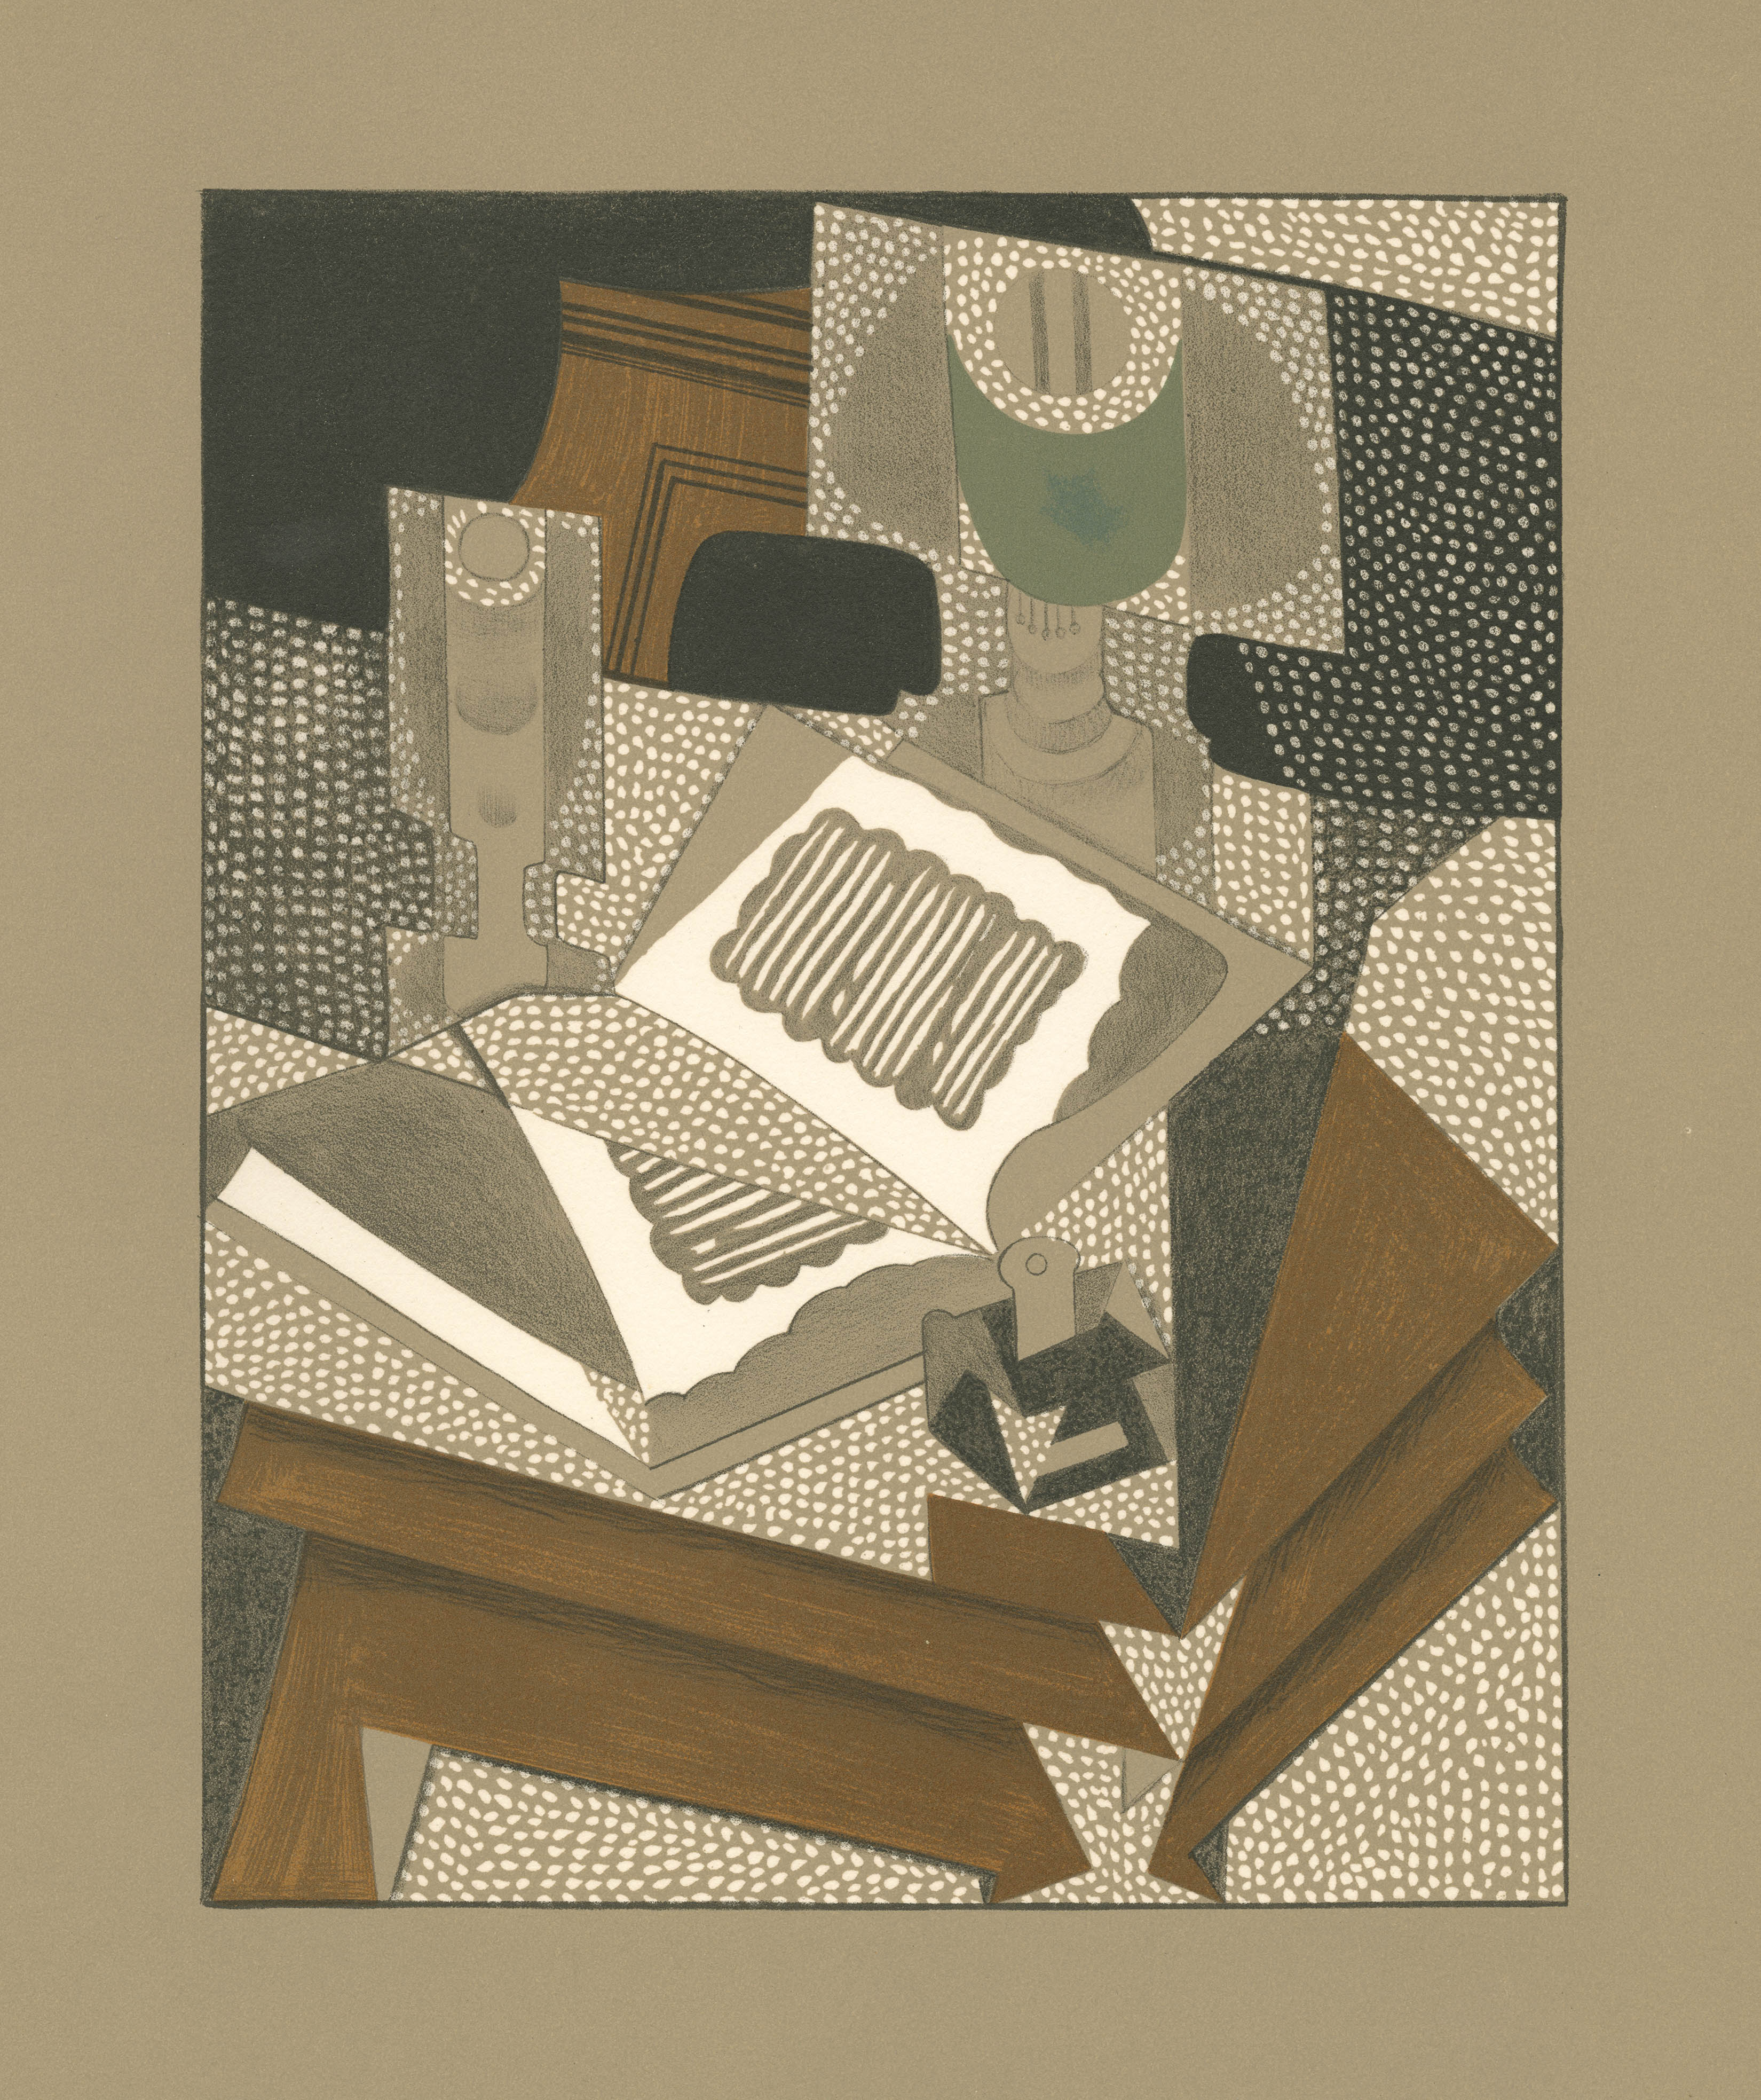 Cubist illustration featuring a book